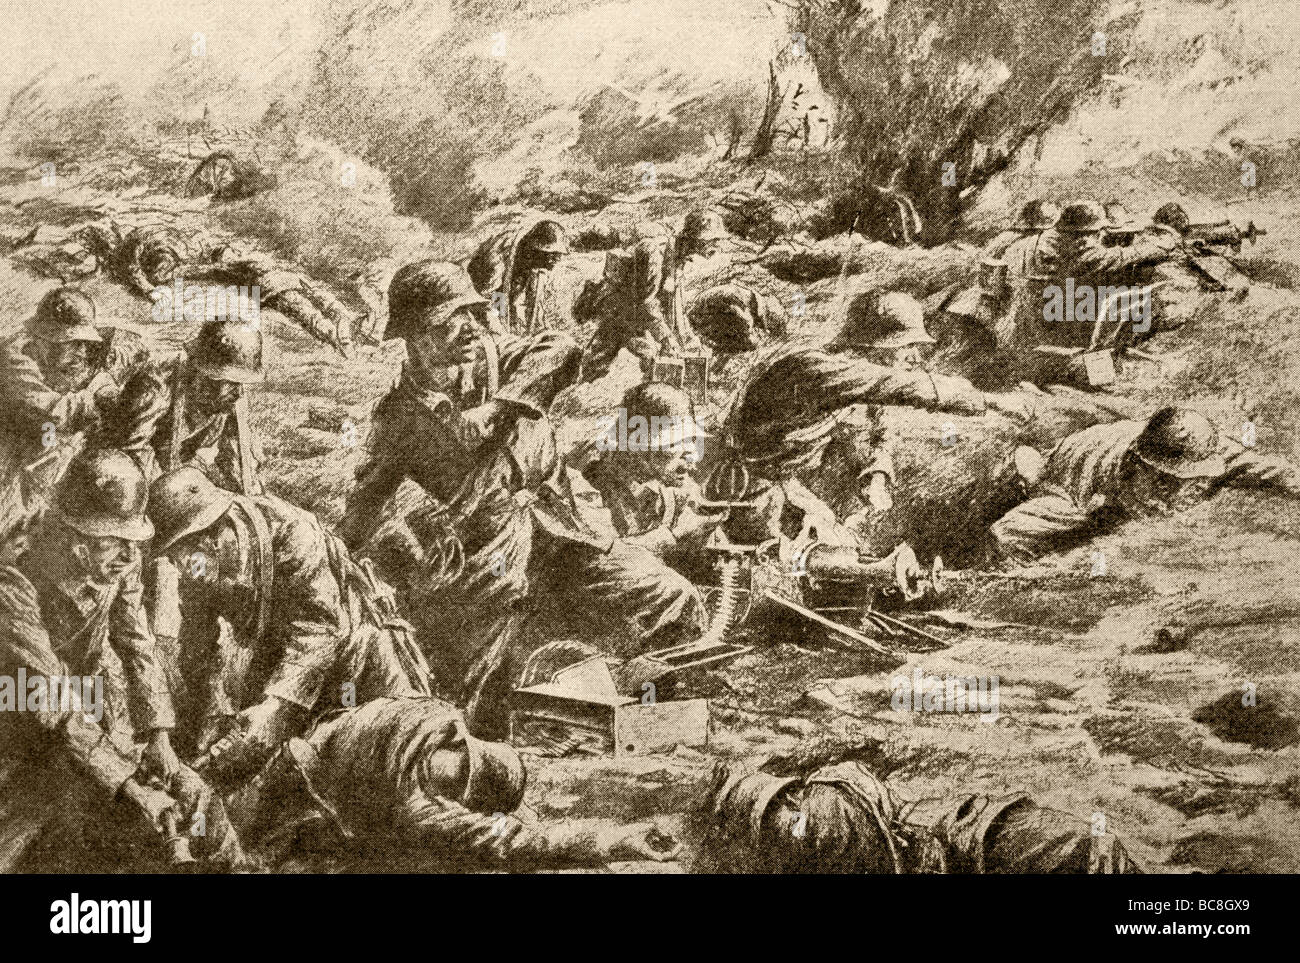 German machine gunners and infantry holding back an attack against their trench. Stock Photo